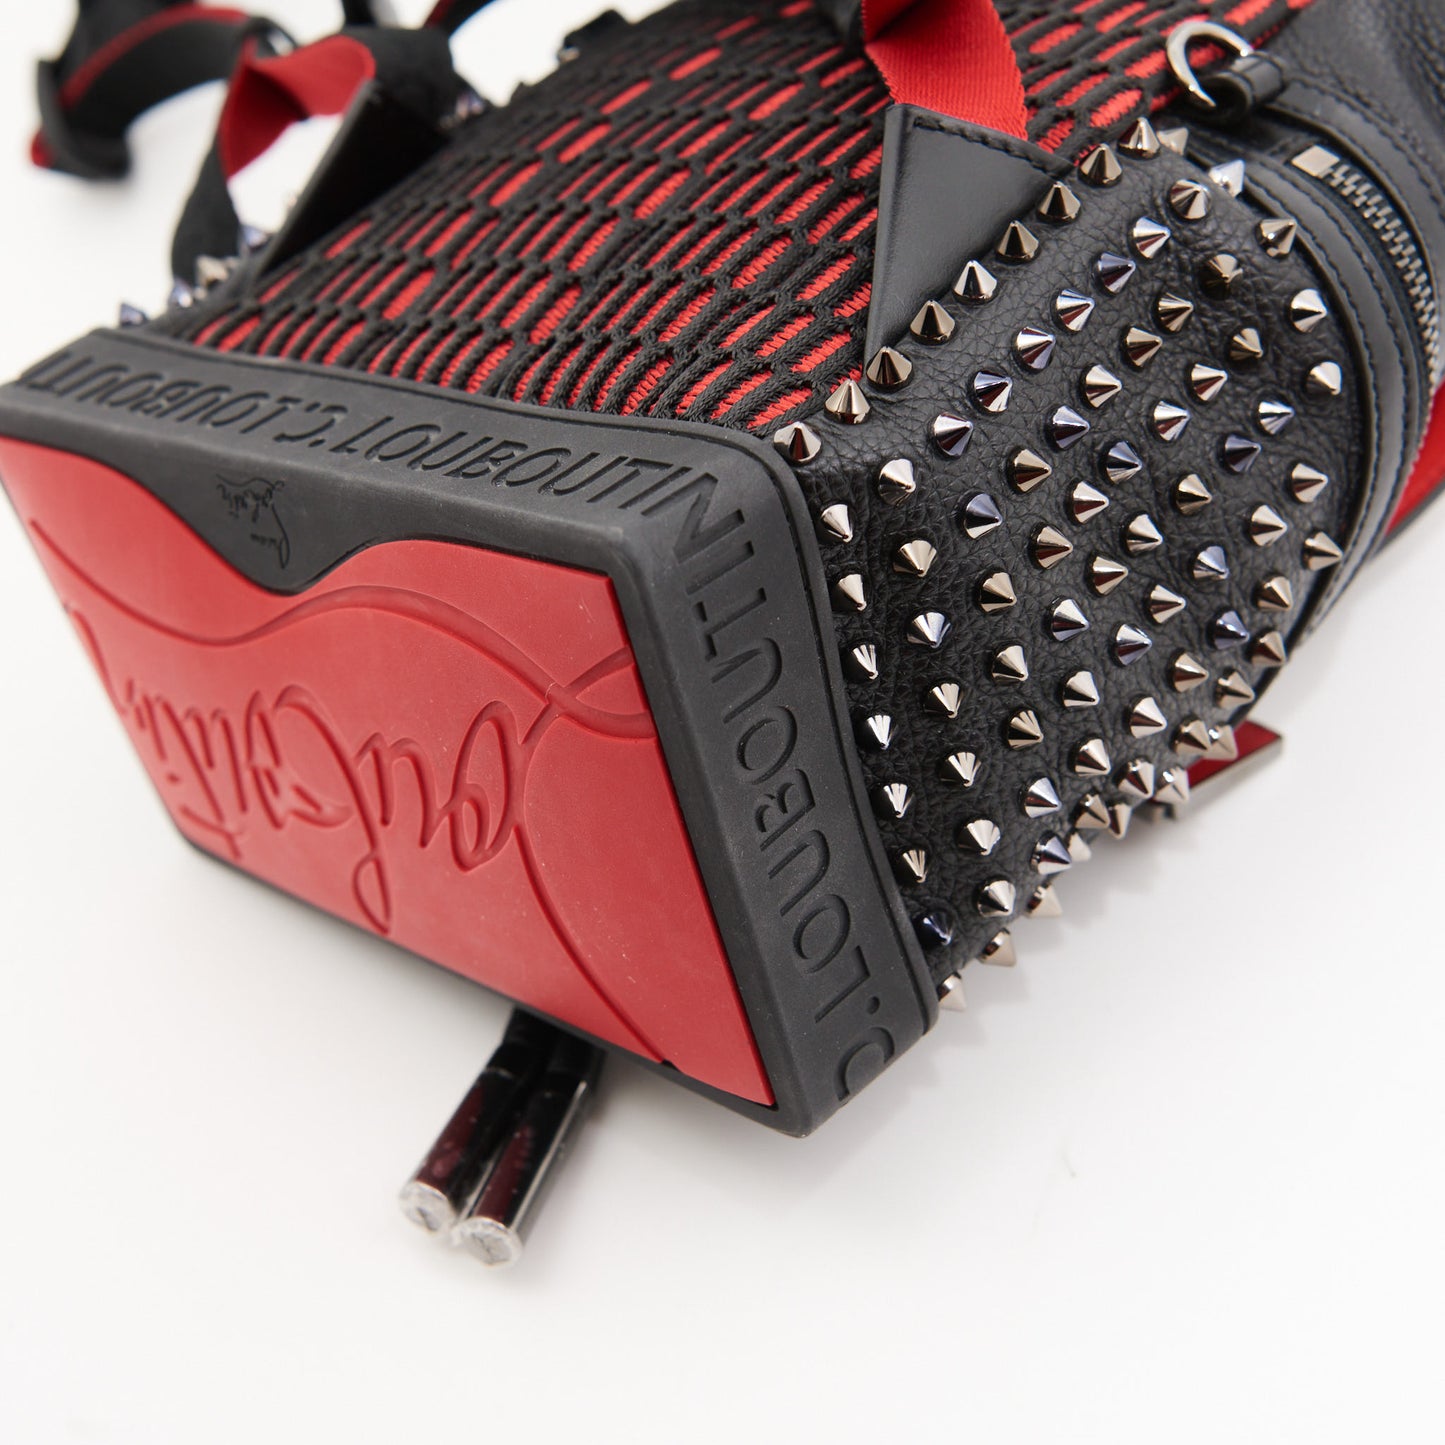 Christian Louboutin Leather Studded Mini Backpack in Black